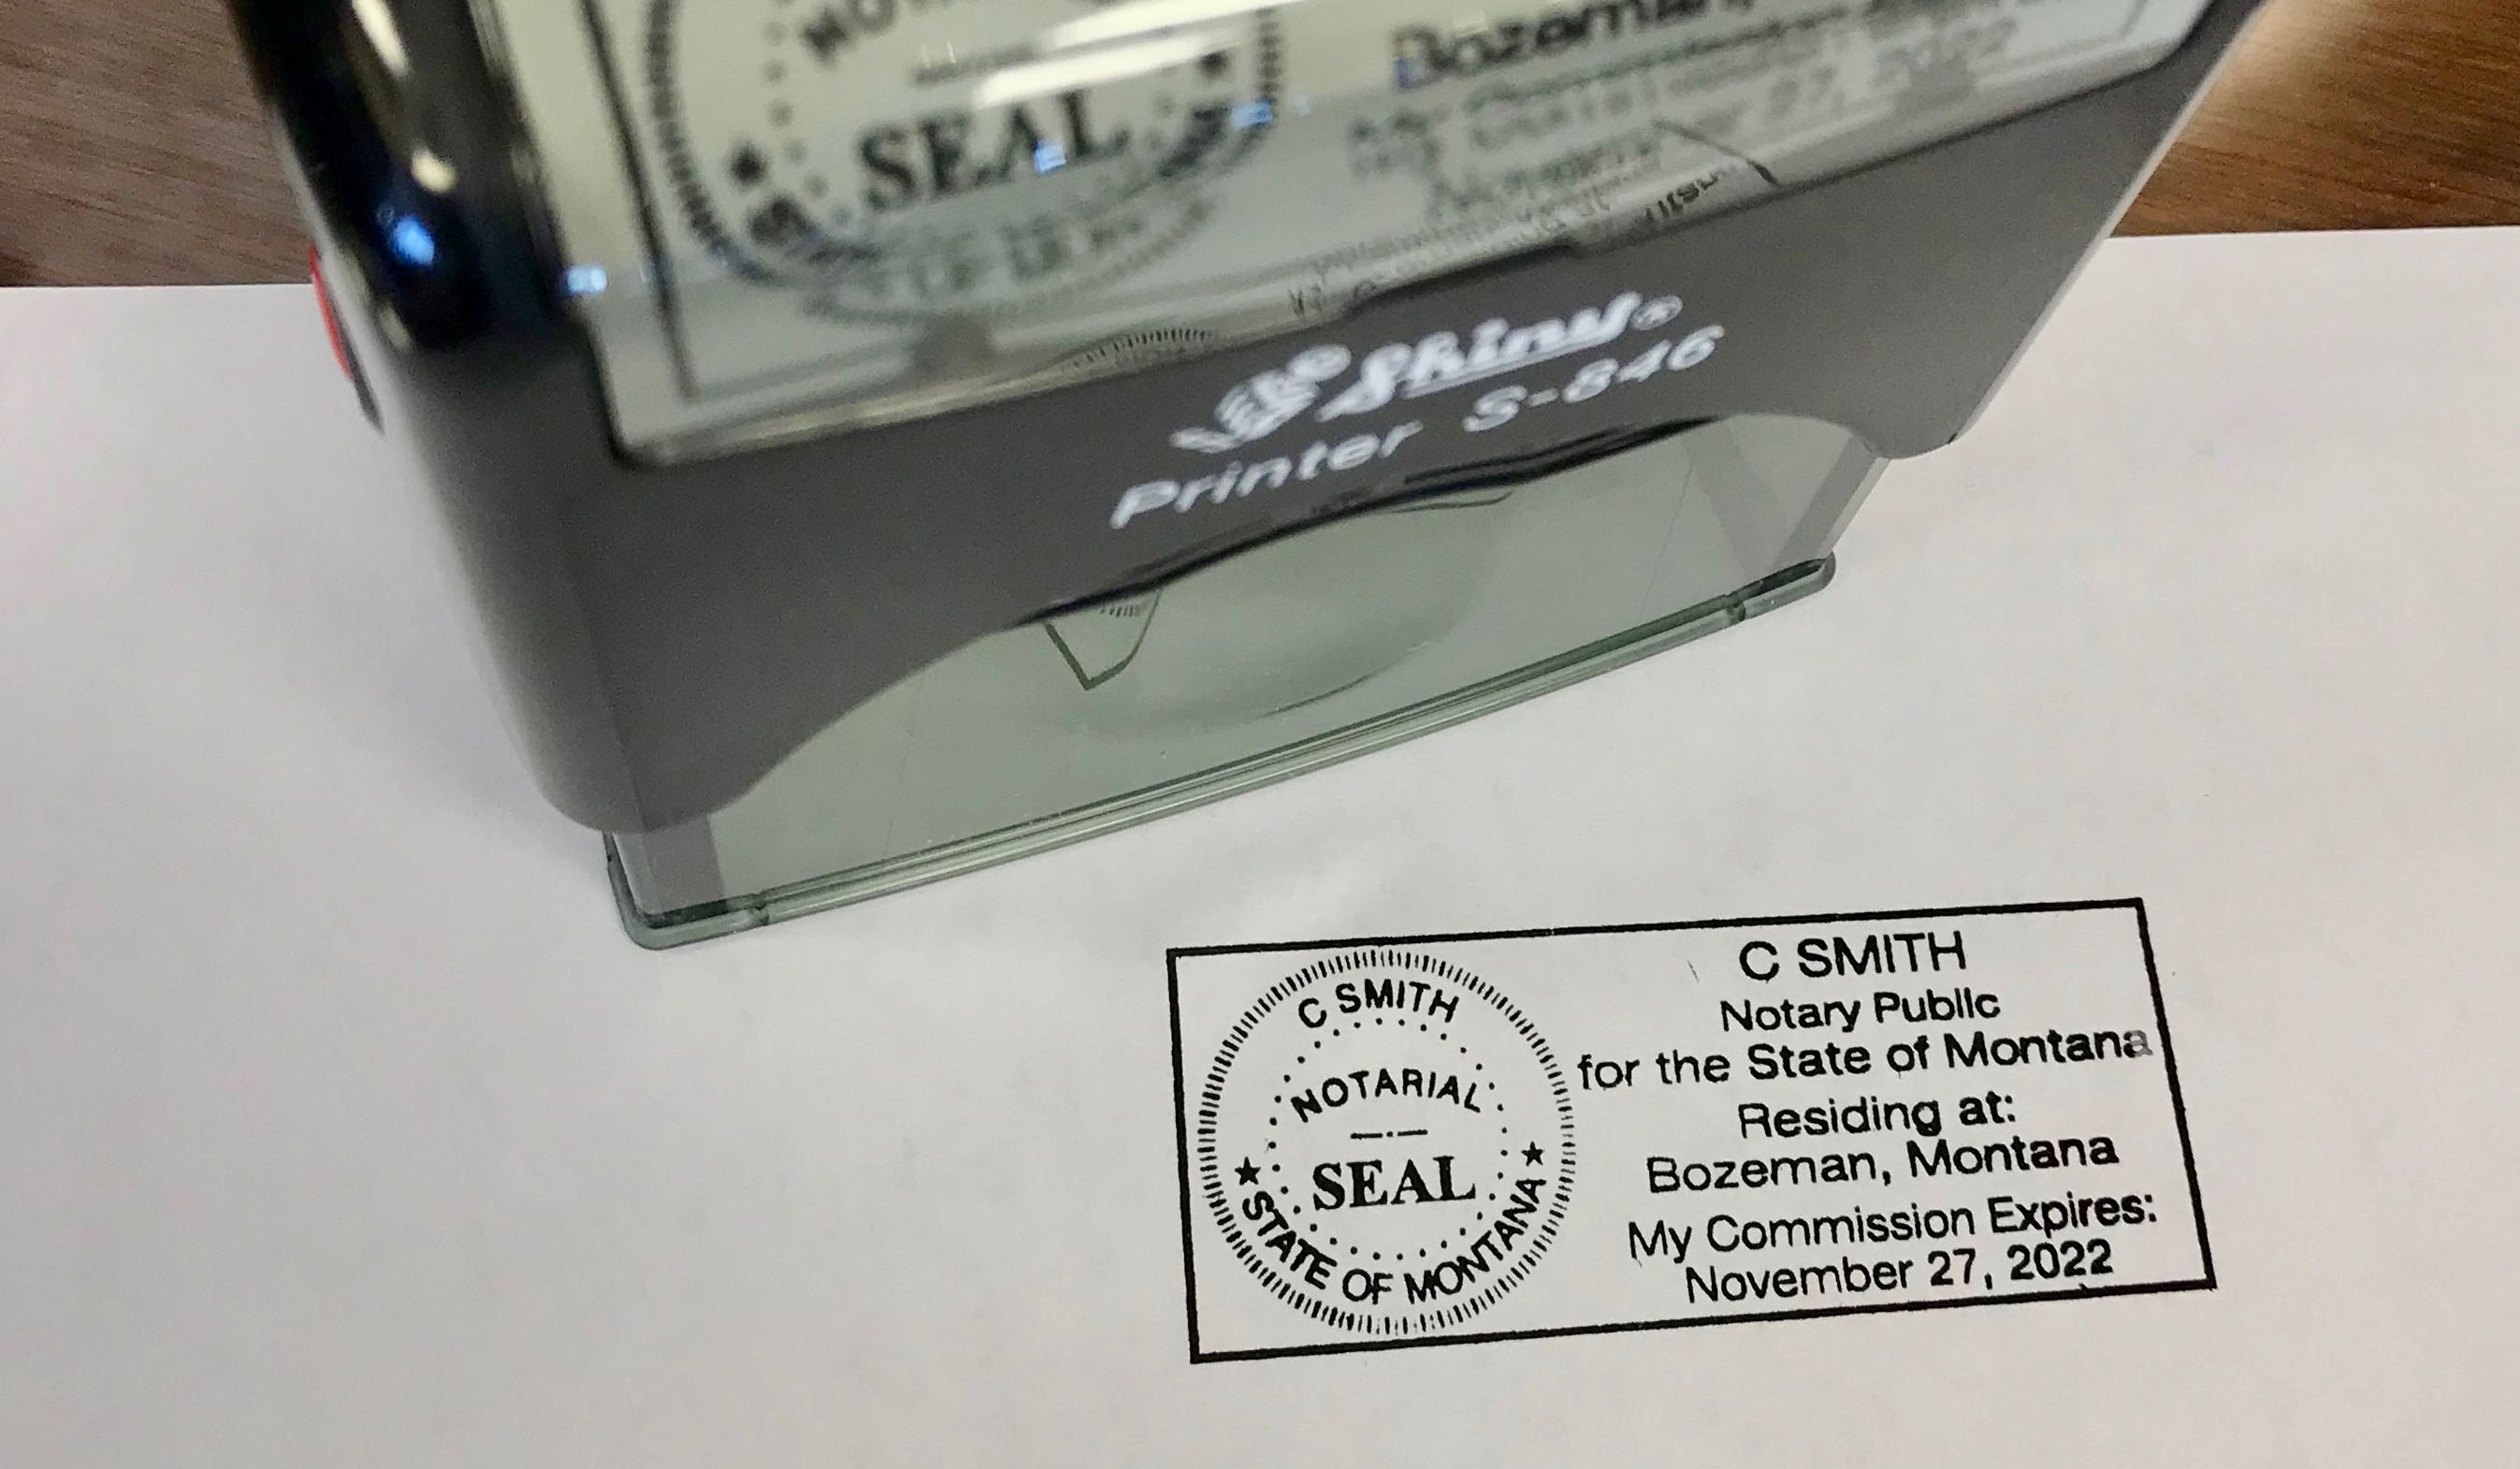 American Bank Notary stamp